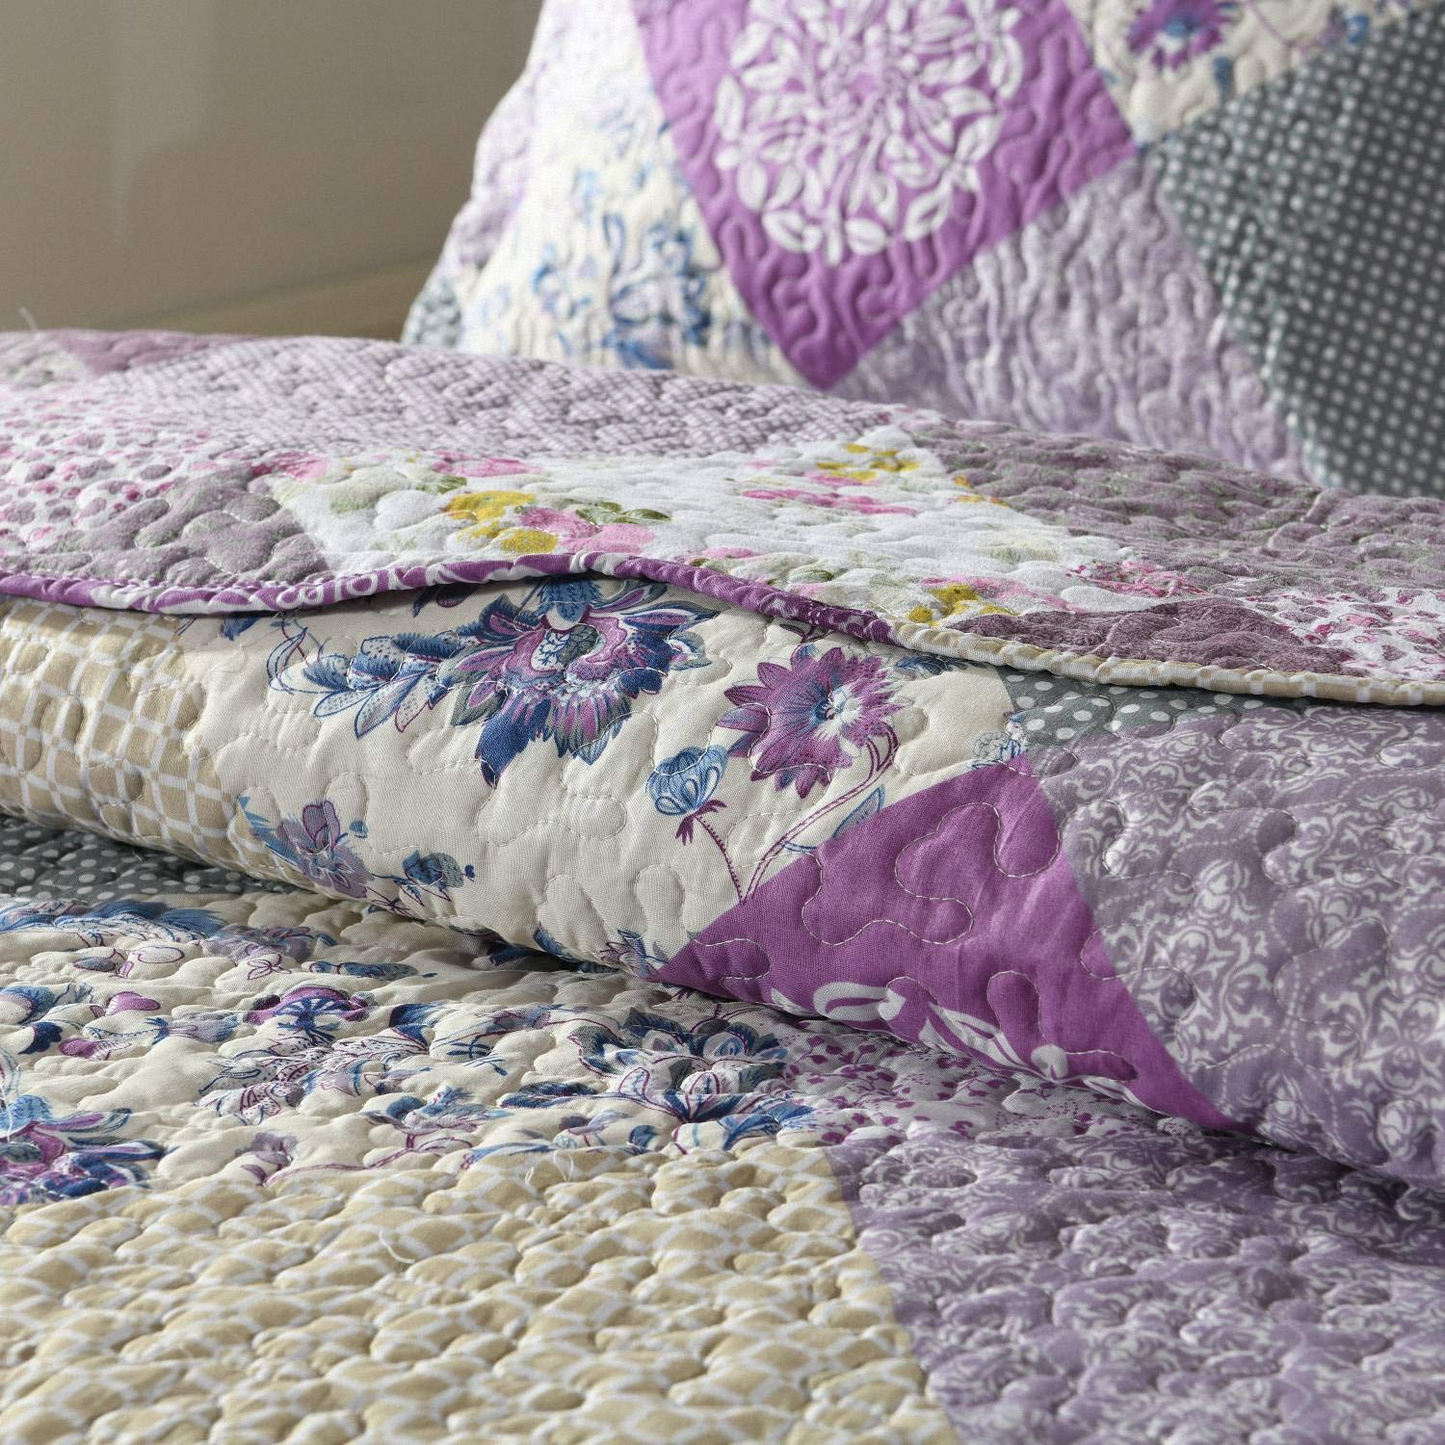 Purple Stitching Bohemian Style 3 Pieces Quilt Set with 2 Pillowcases